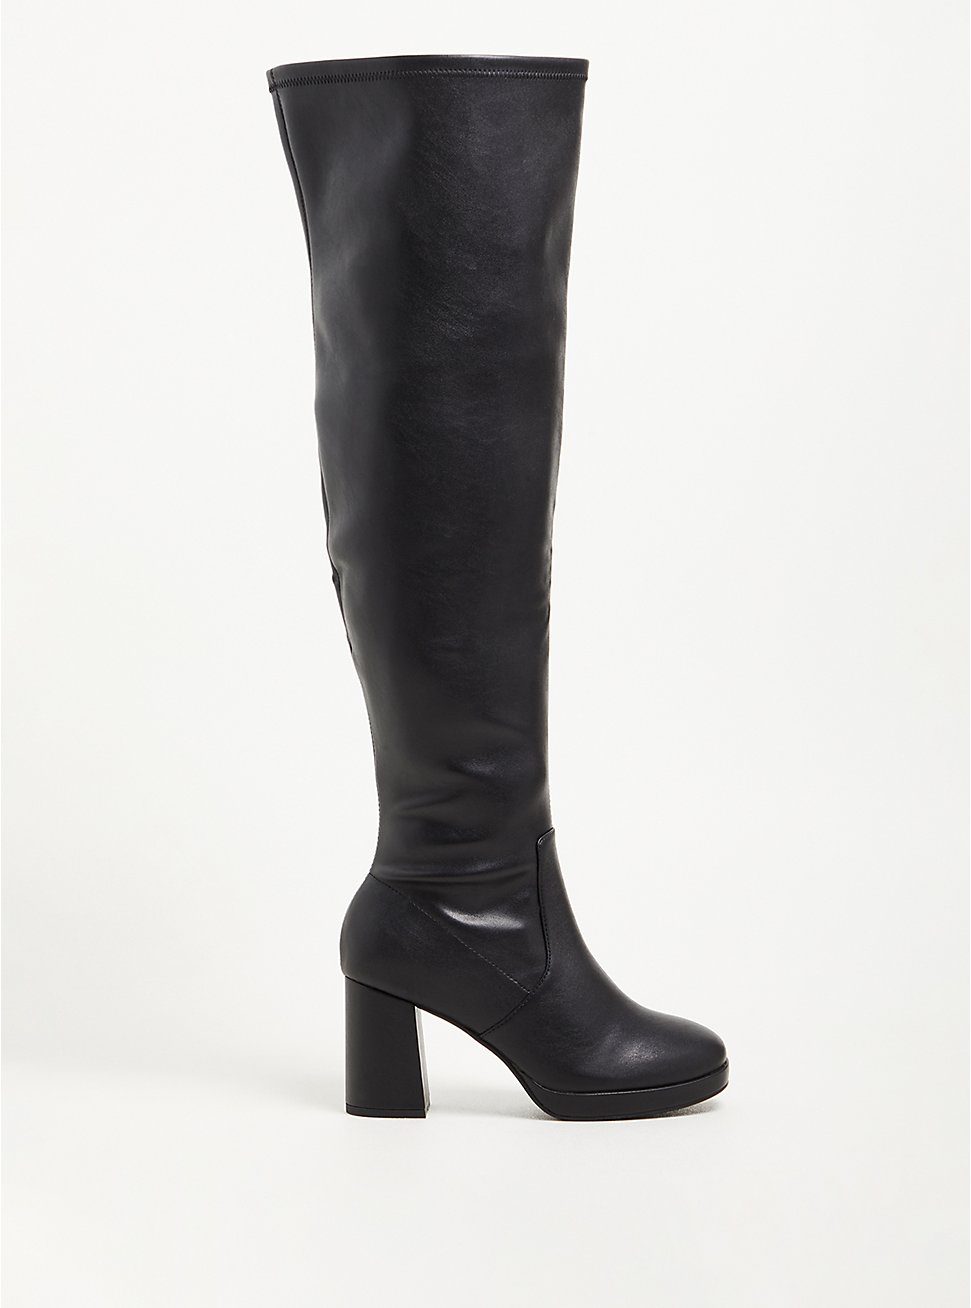 Stretch Heel Over The Knee Boot - Black Faux Leather (WW), BLACK, hi-res